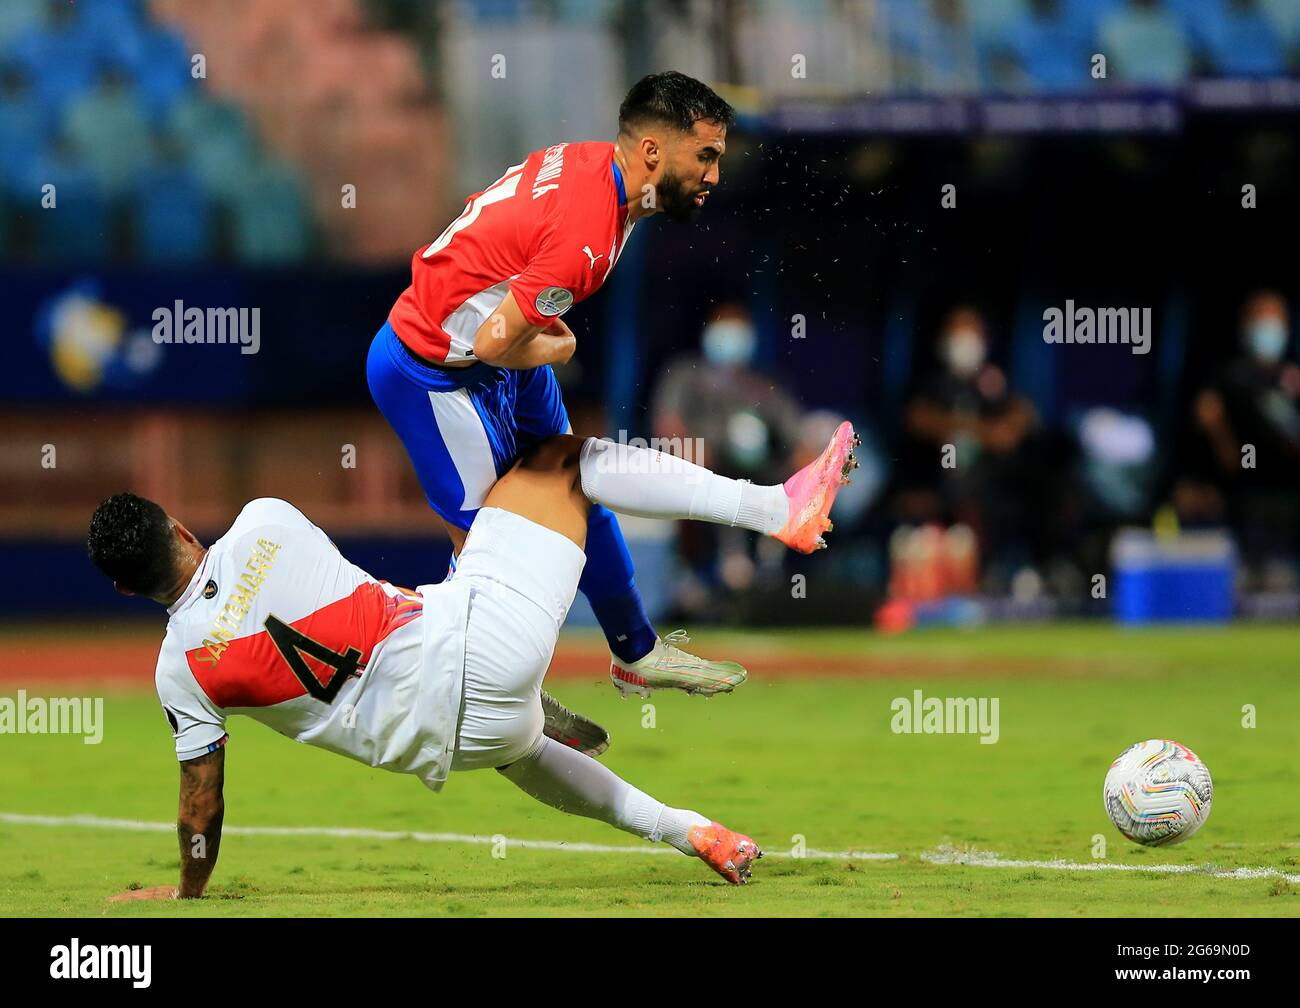 GOIANIA, BRAZIL - JULY 02: Alberto Espinola of Paraguay competes for the ball with Anderson Santamaria of Peru ,during the Quarterfinal match between Peru and Paraguay as part of Conmebol Copa America Brazil 2021 at Estadio Olimpico on July 2, 2021 in Goiania, Brazil. (MB Media) Stock Photo